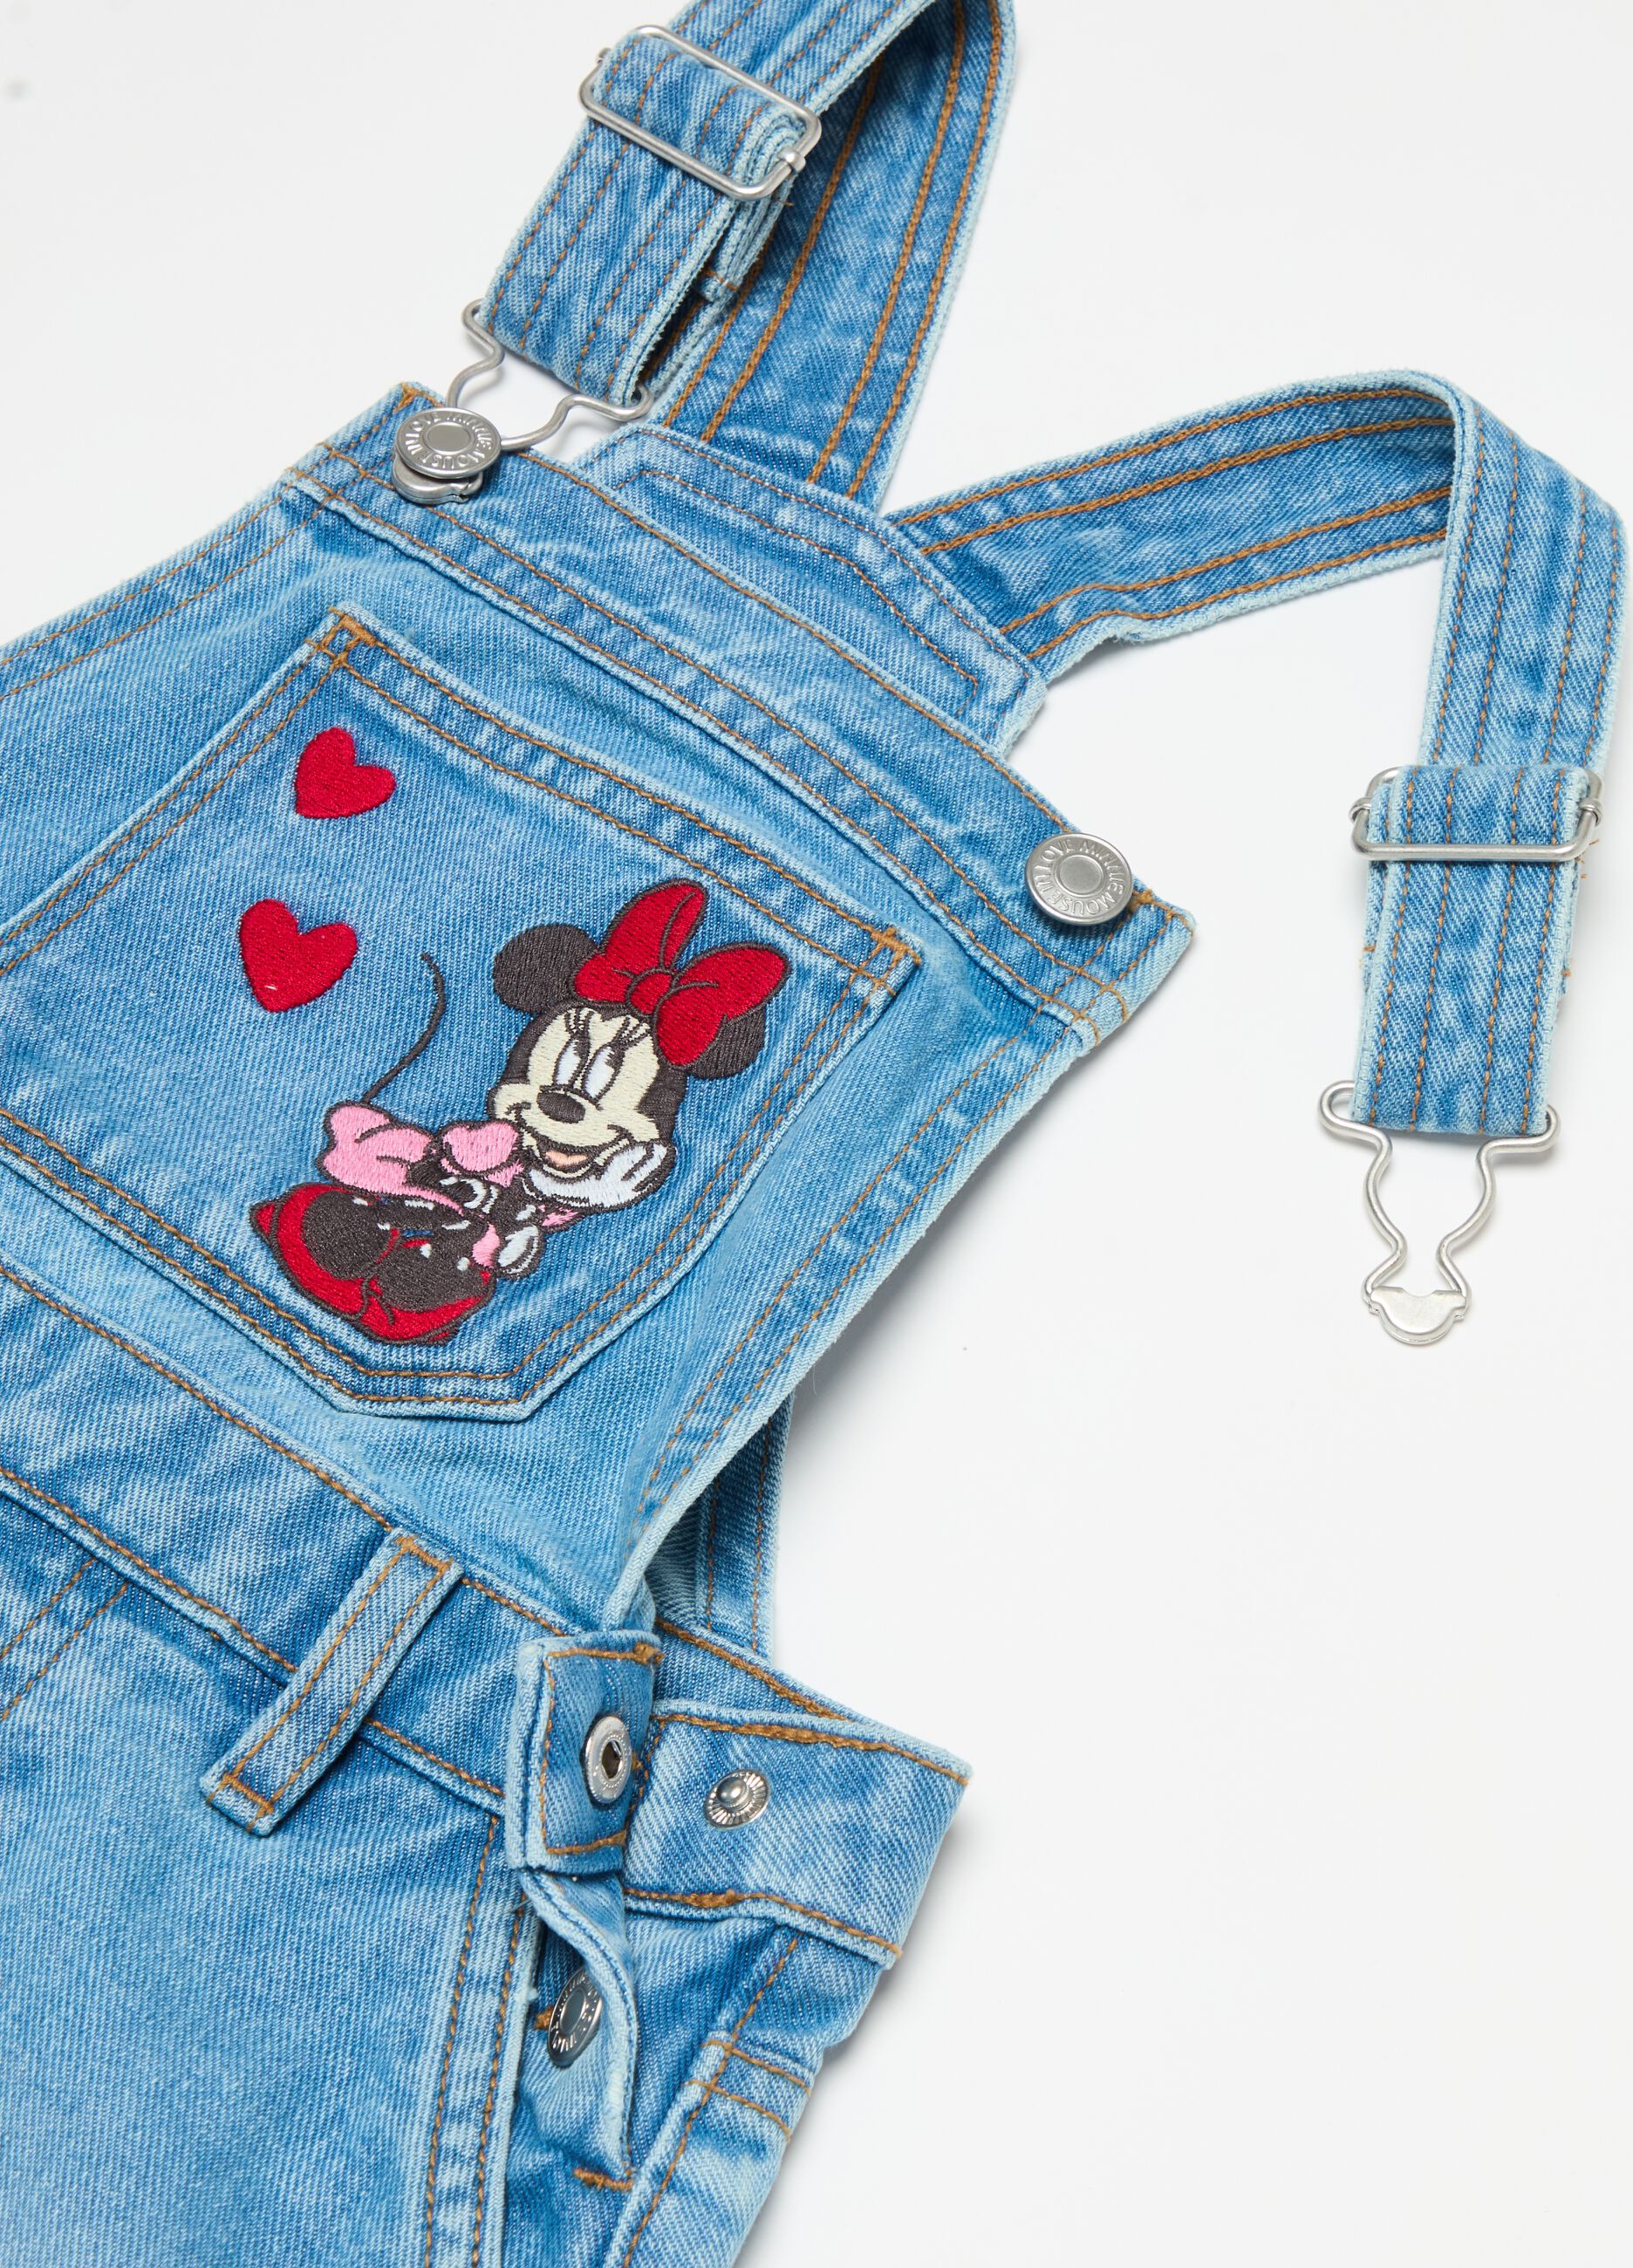 Denim pinafore with Minnie Mouse embroidery